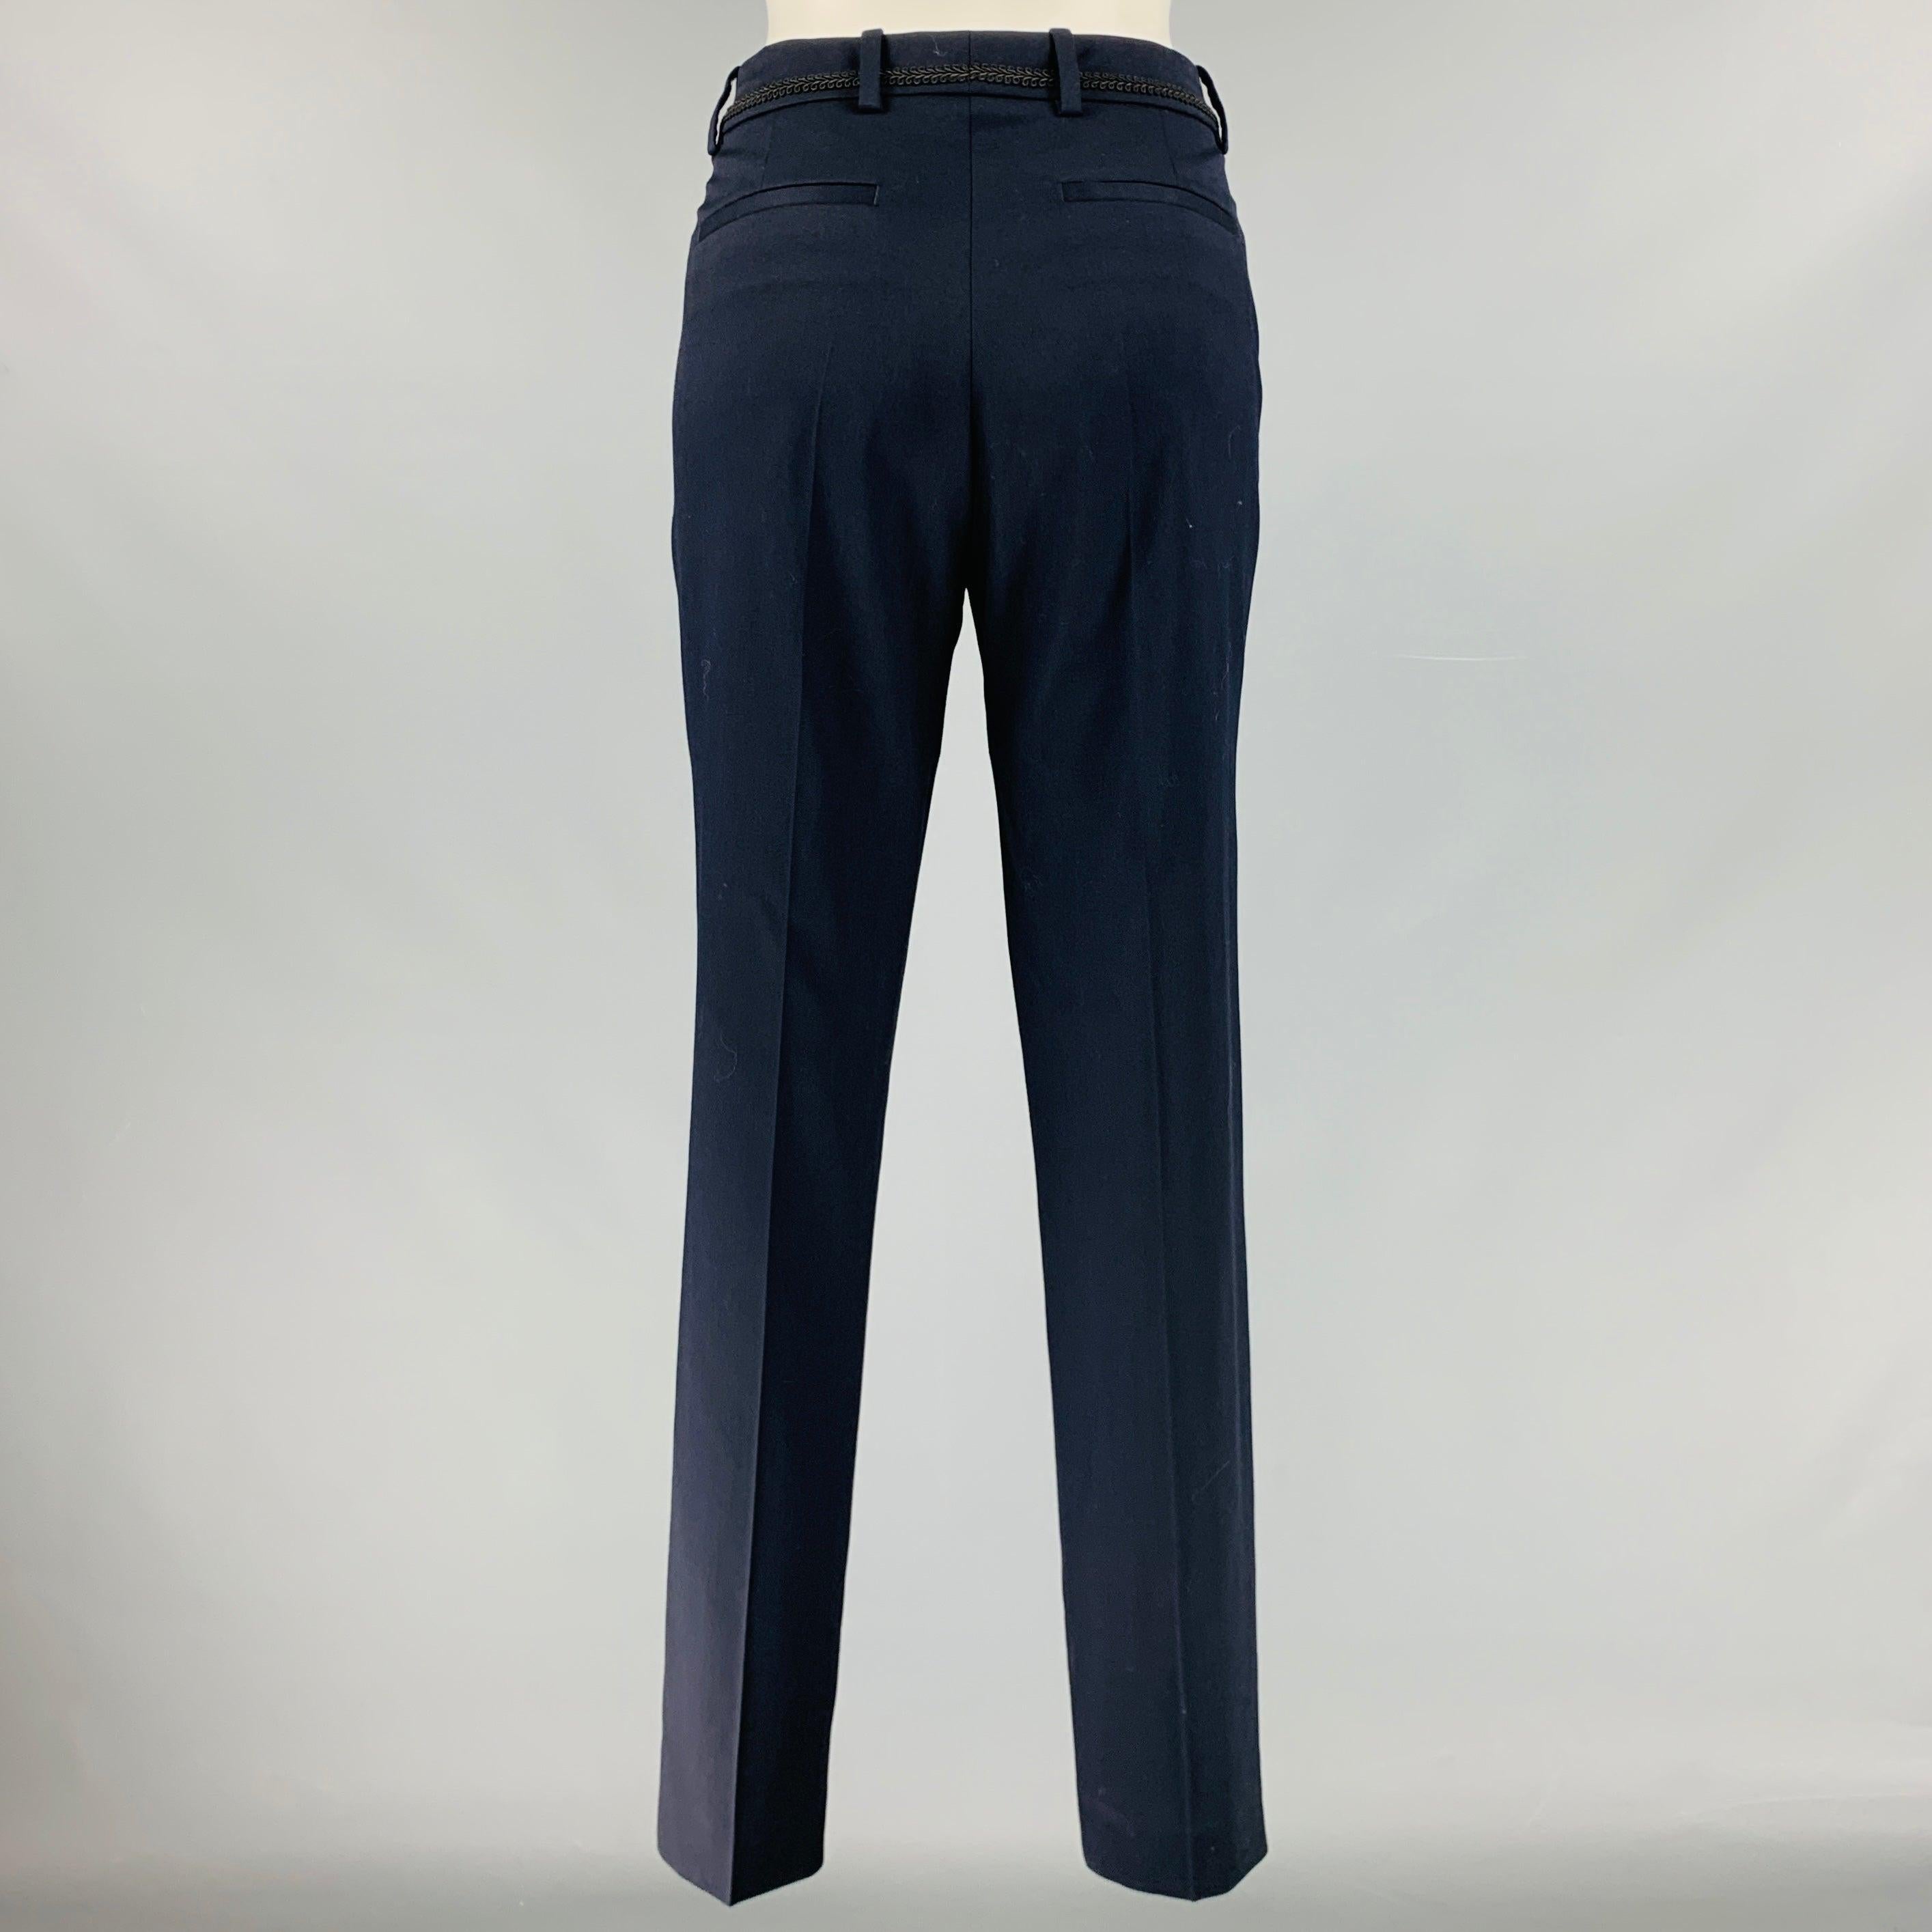 THE KOOPLES Size 4 Navy Black Wool Blend Contrast Trim Dress Pants In Excellent Condition For Sale In San Francisco, CA